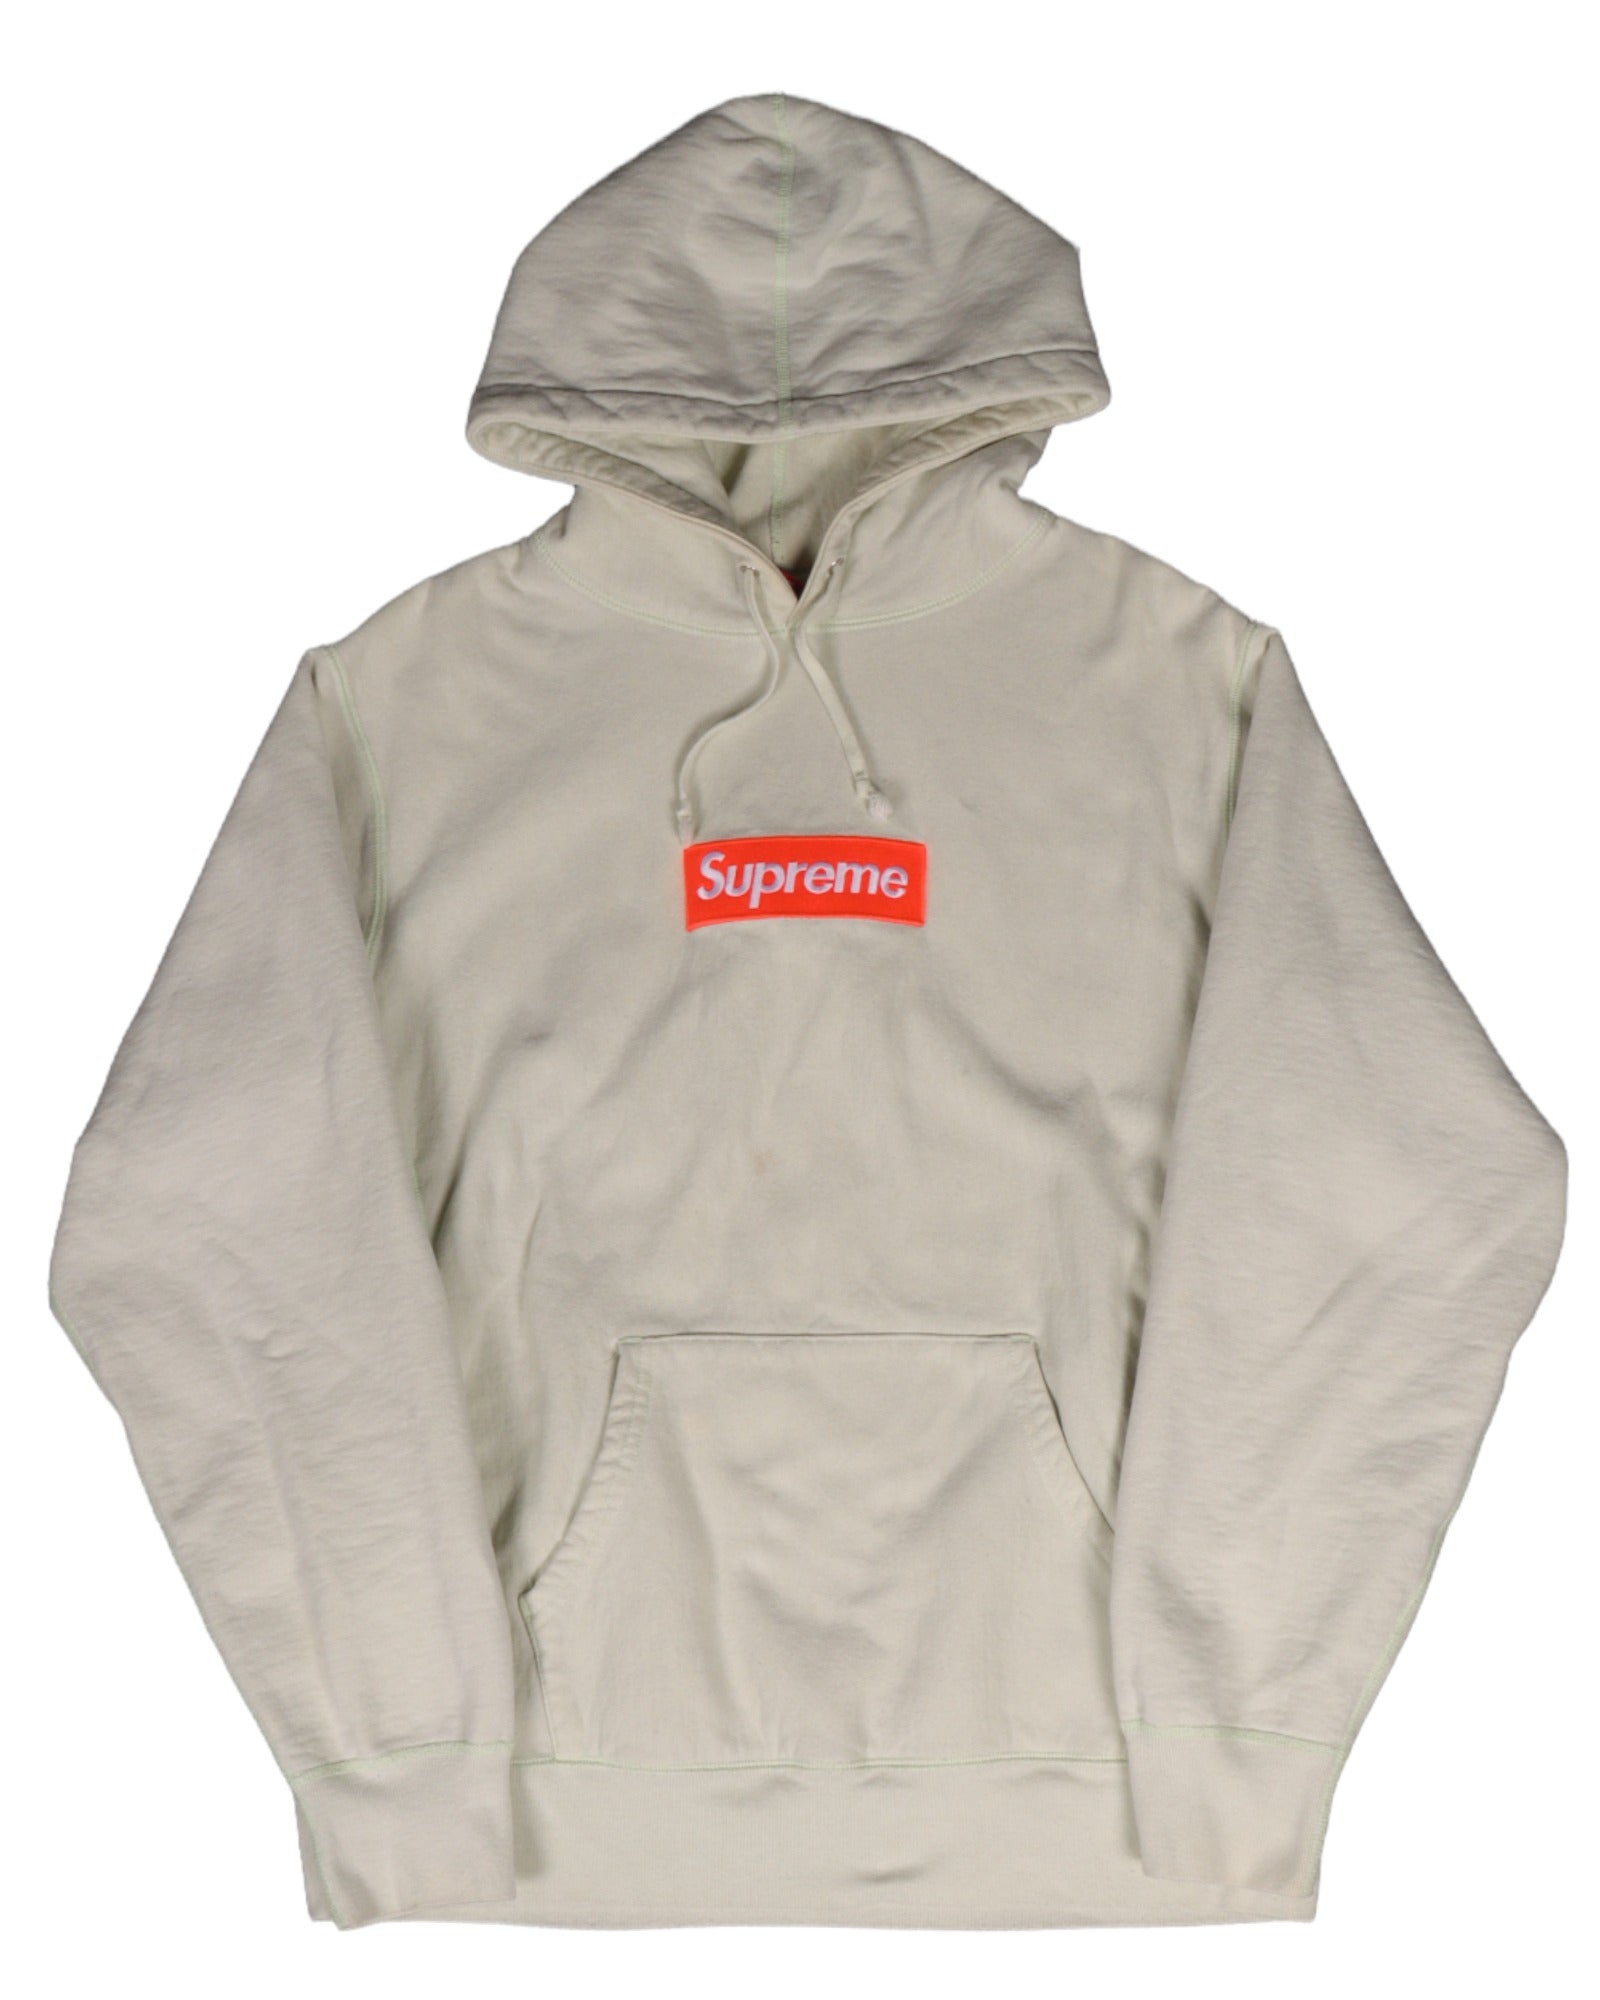 I have a Faded Box logo Hoodie, any way to restore the color? : r/Supreme